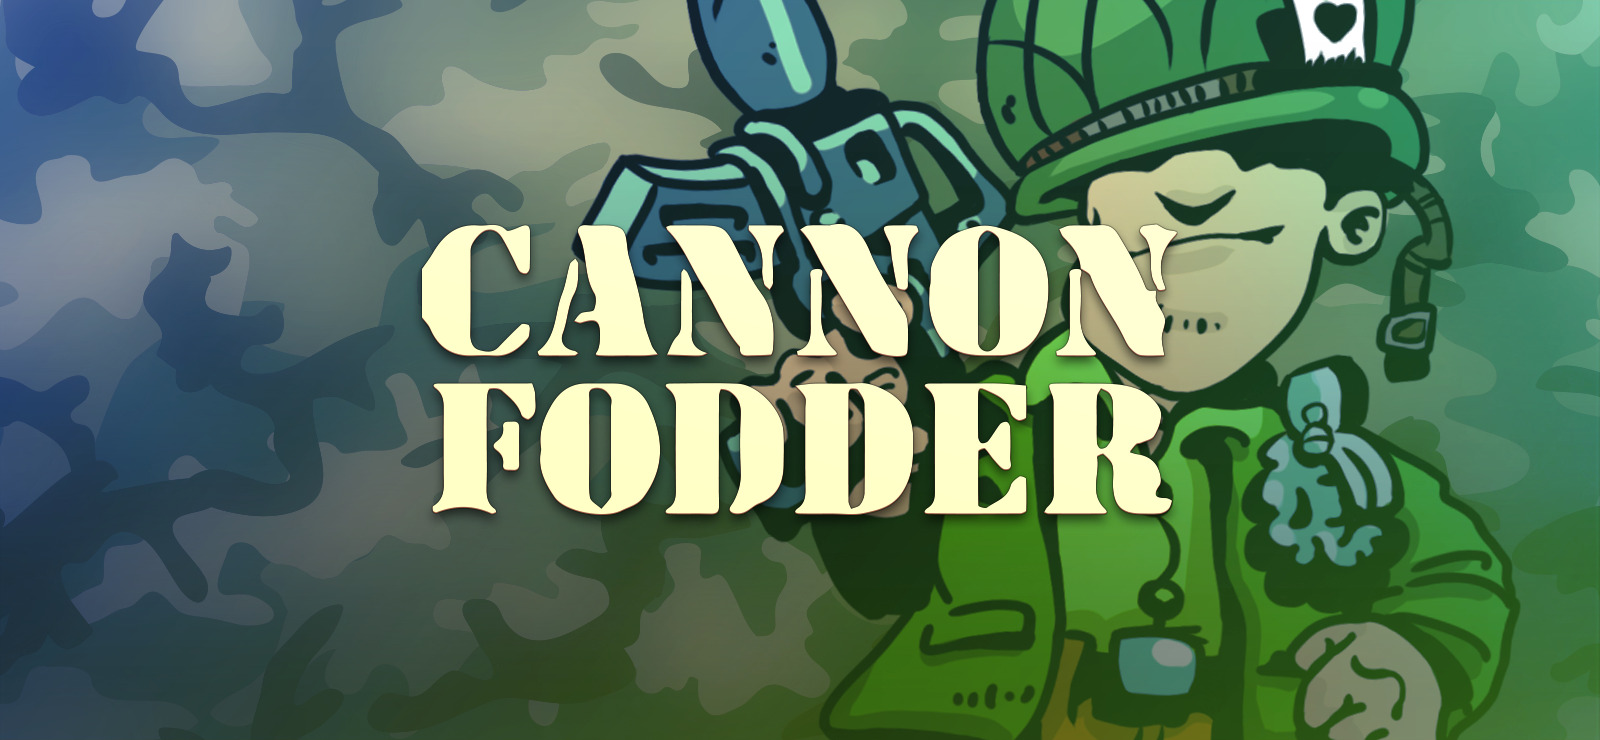 cannon fodder 3 free download